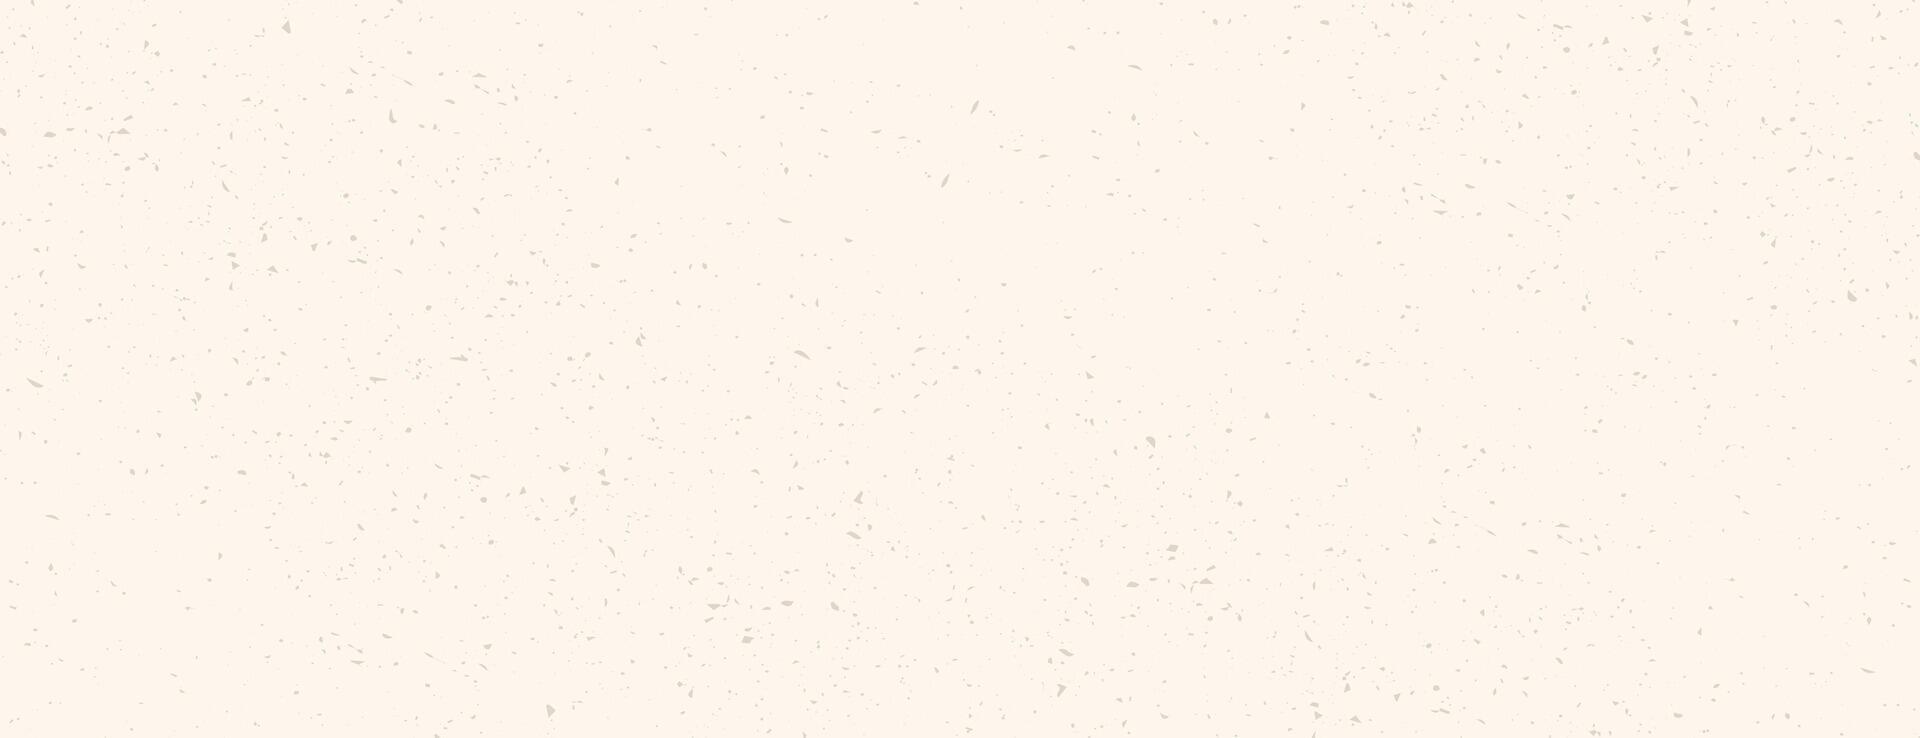 Light cream colored paper seamless texture vector